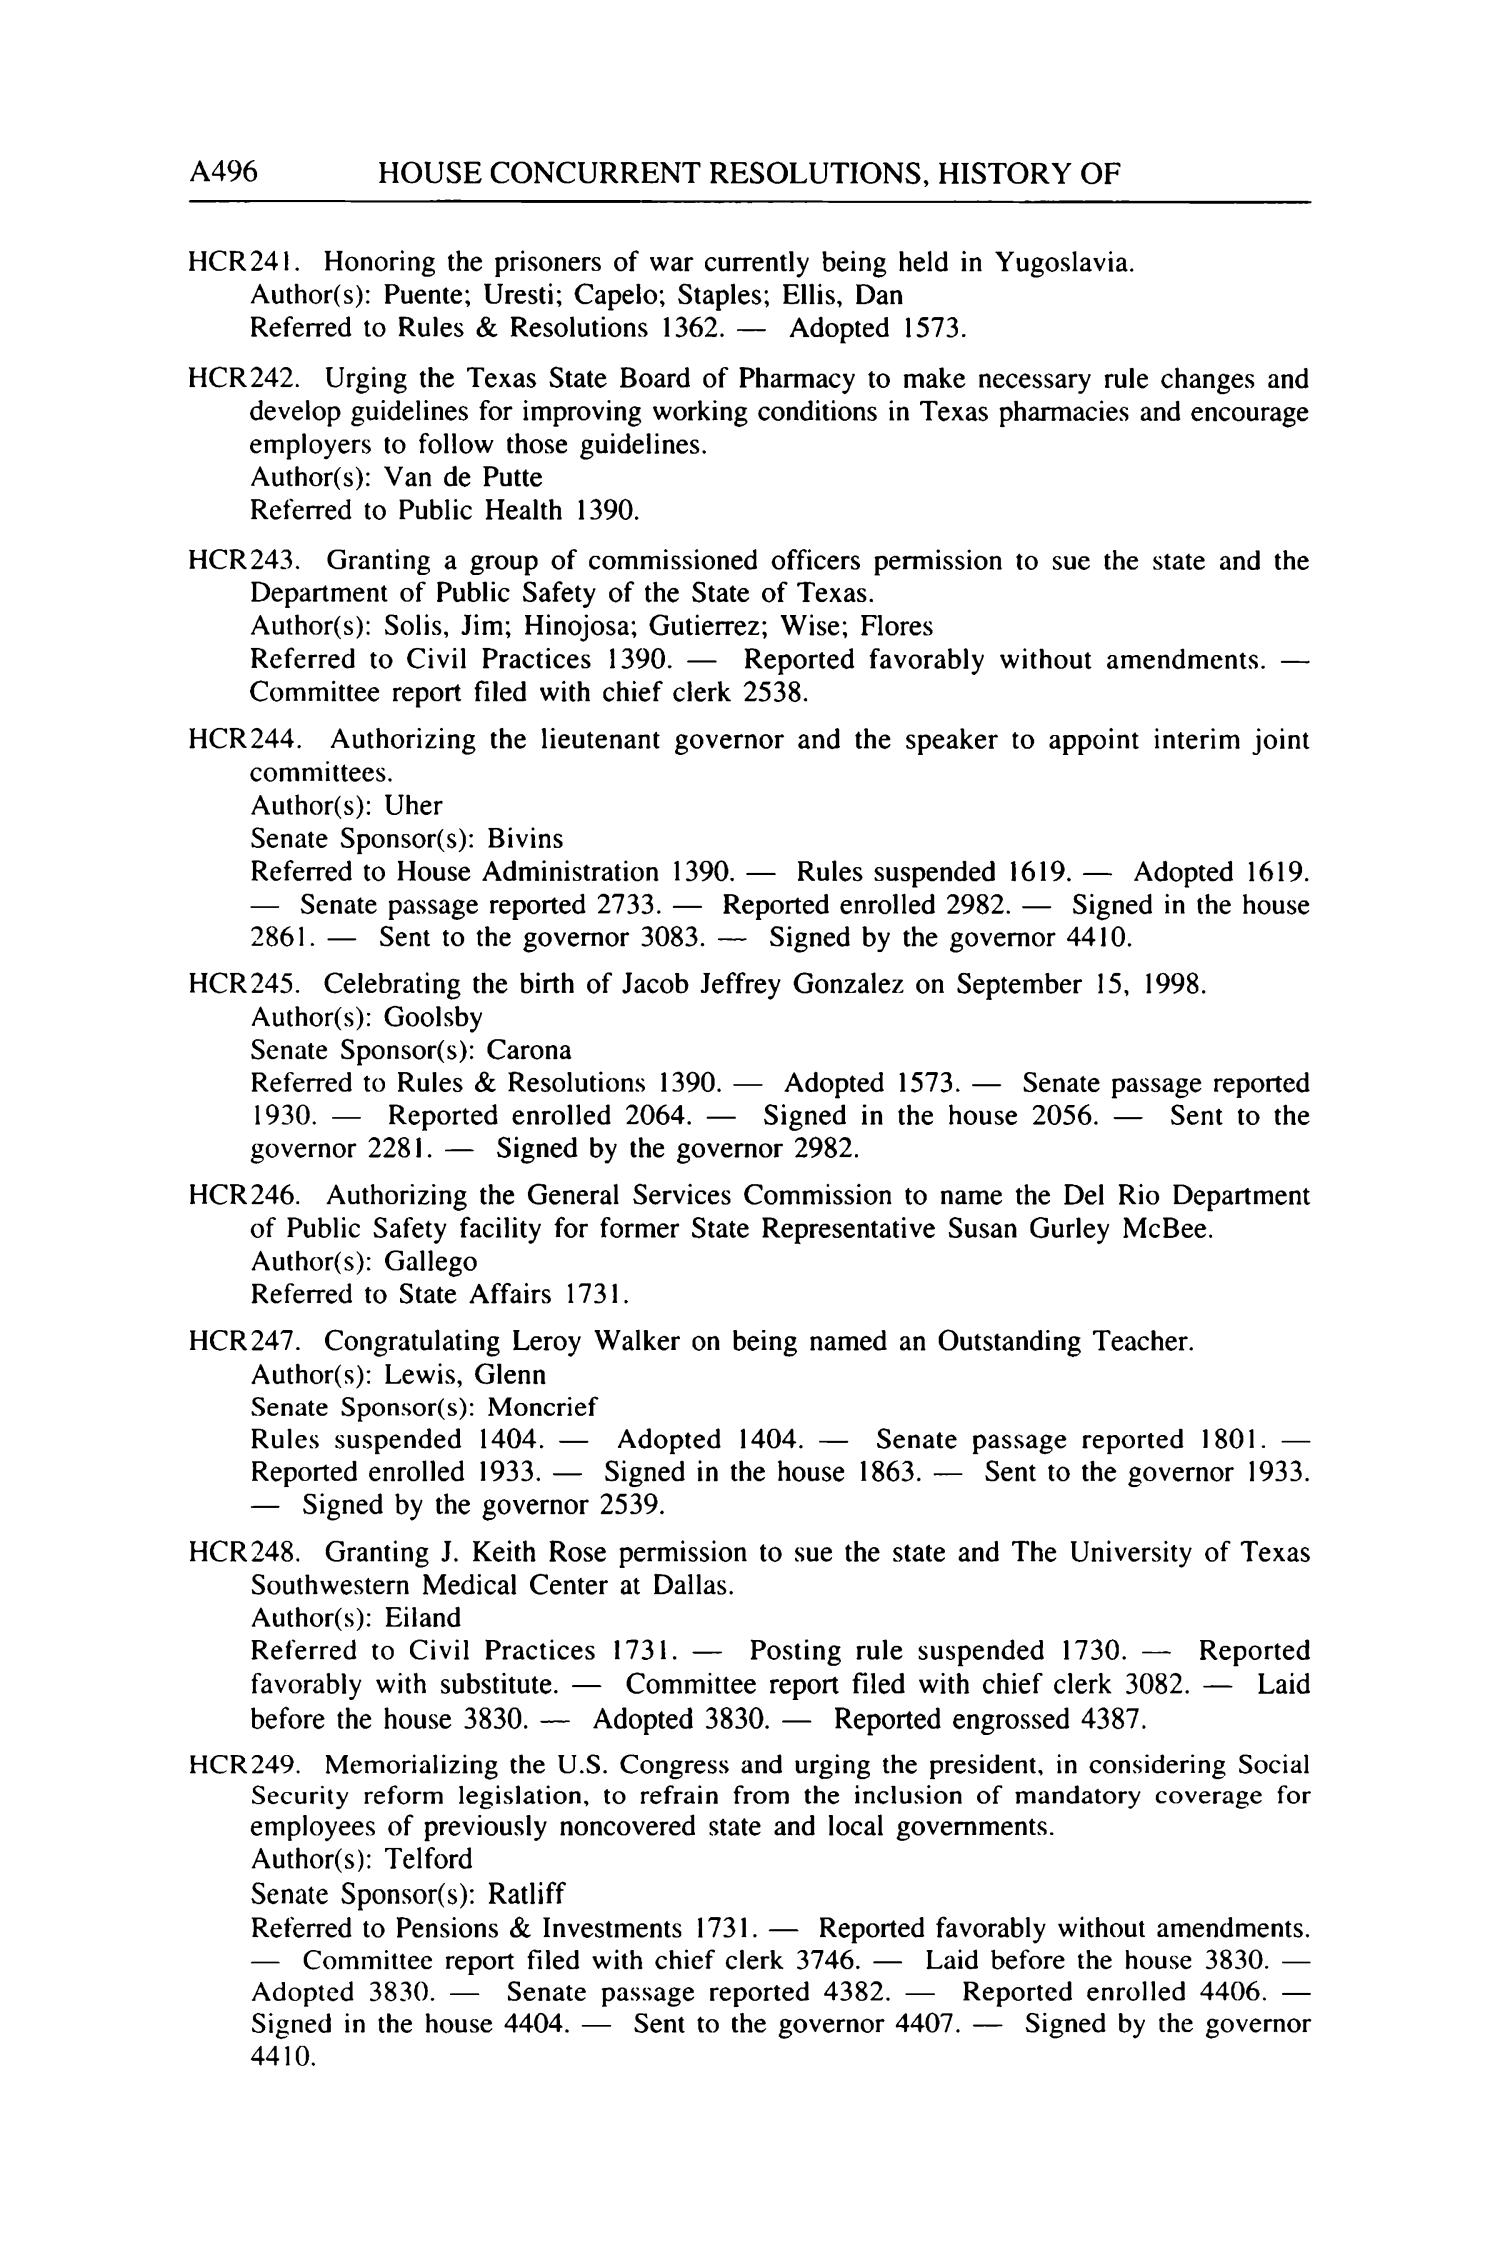 Journal of the House of Representatives of the Regular Session of the Seventy-Sixth Legislature of the State of Texas, Volume 5
                                                
                                                    A496
                                                